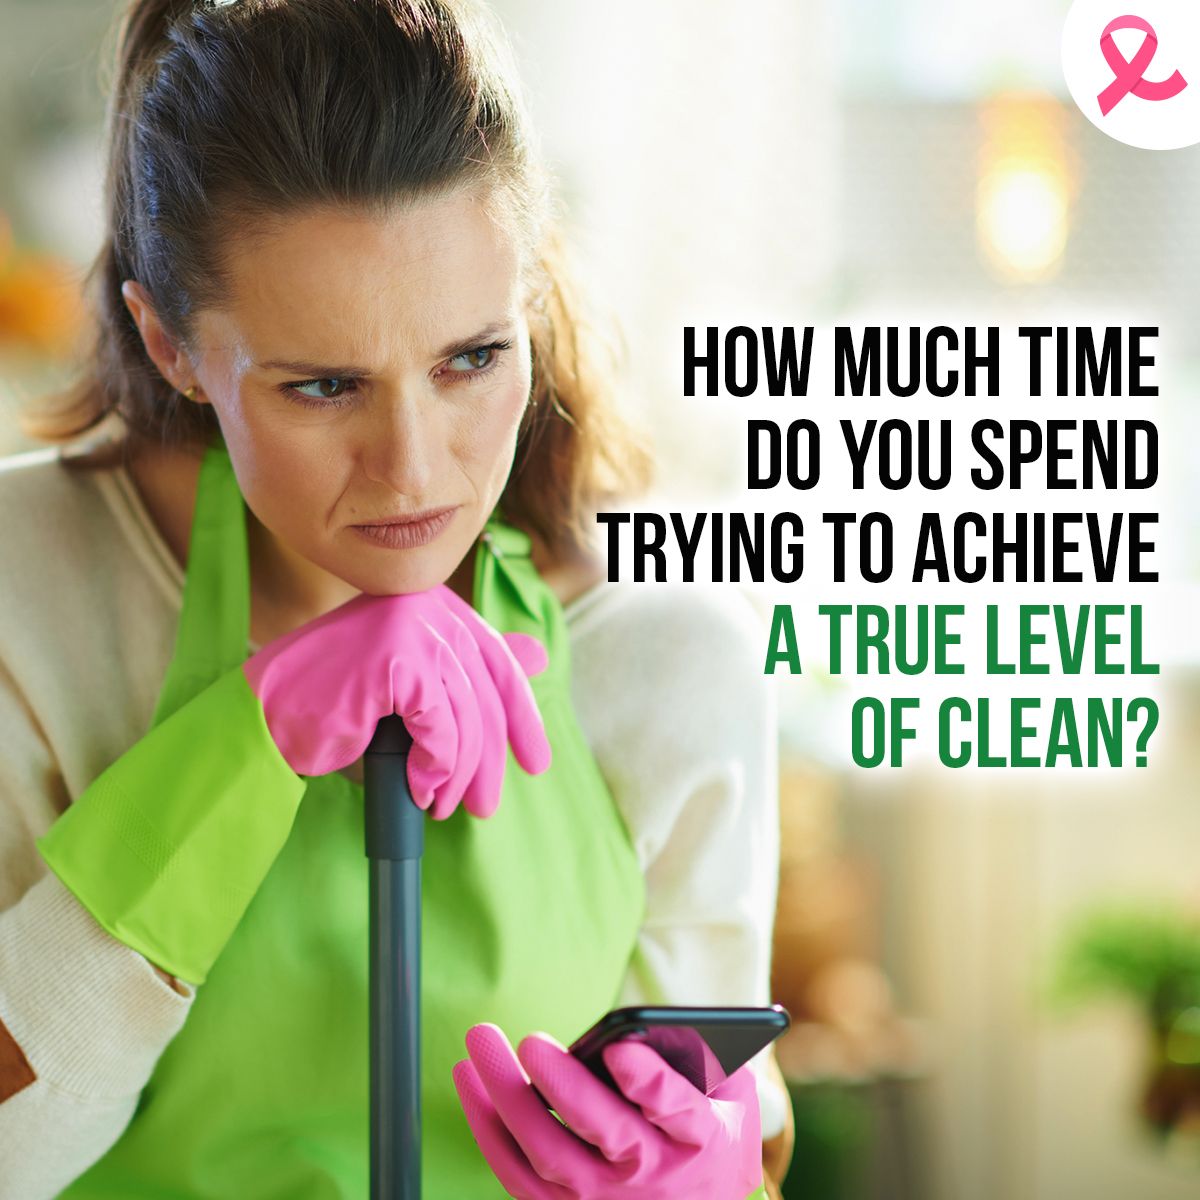 Is Your Cleaning Routine Taking Longer Than Expected?